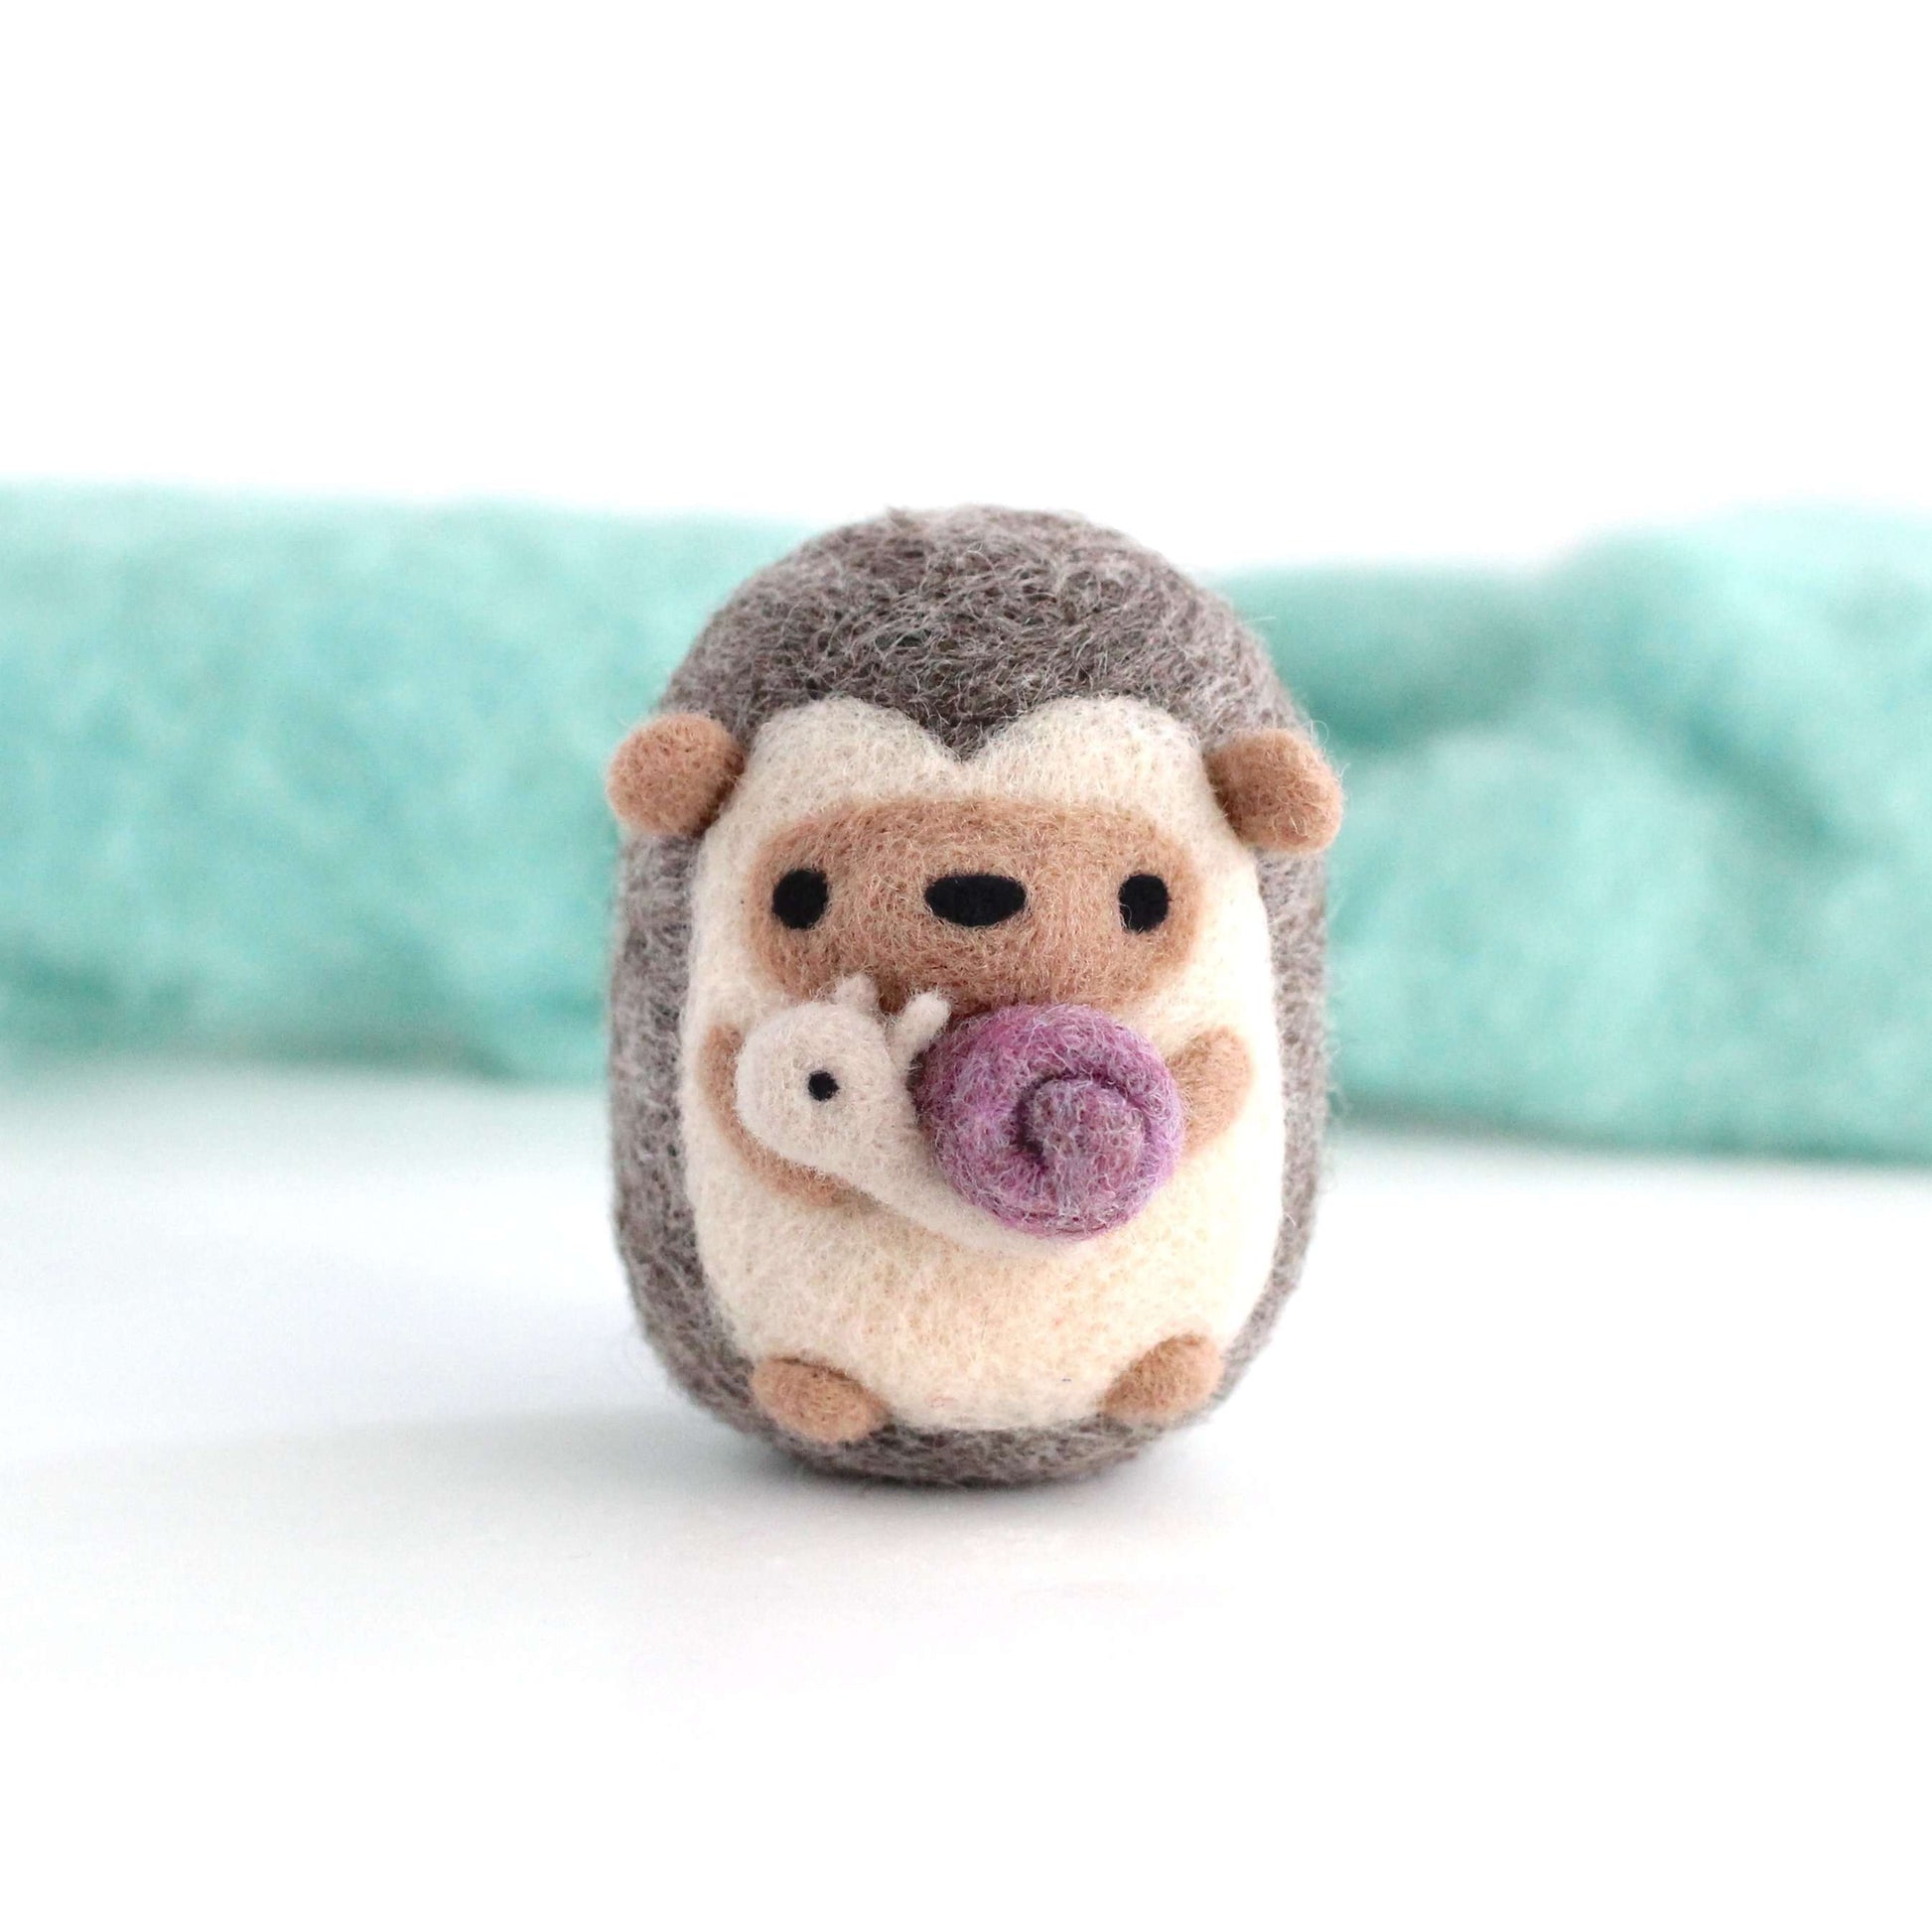 Needle Felted Hedgehog holding Snail by Wild Whimsy Woolies